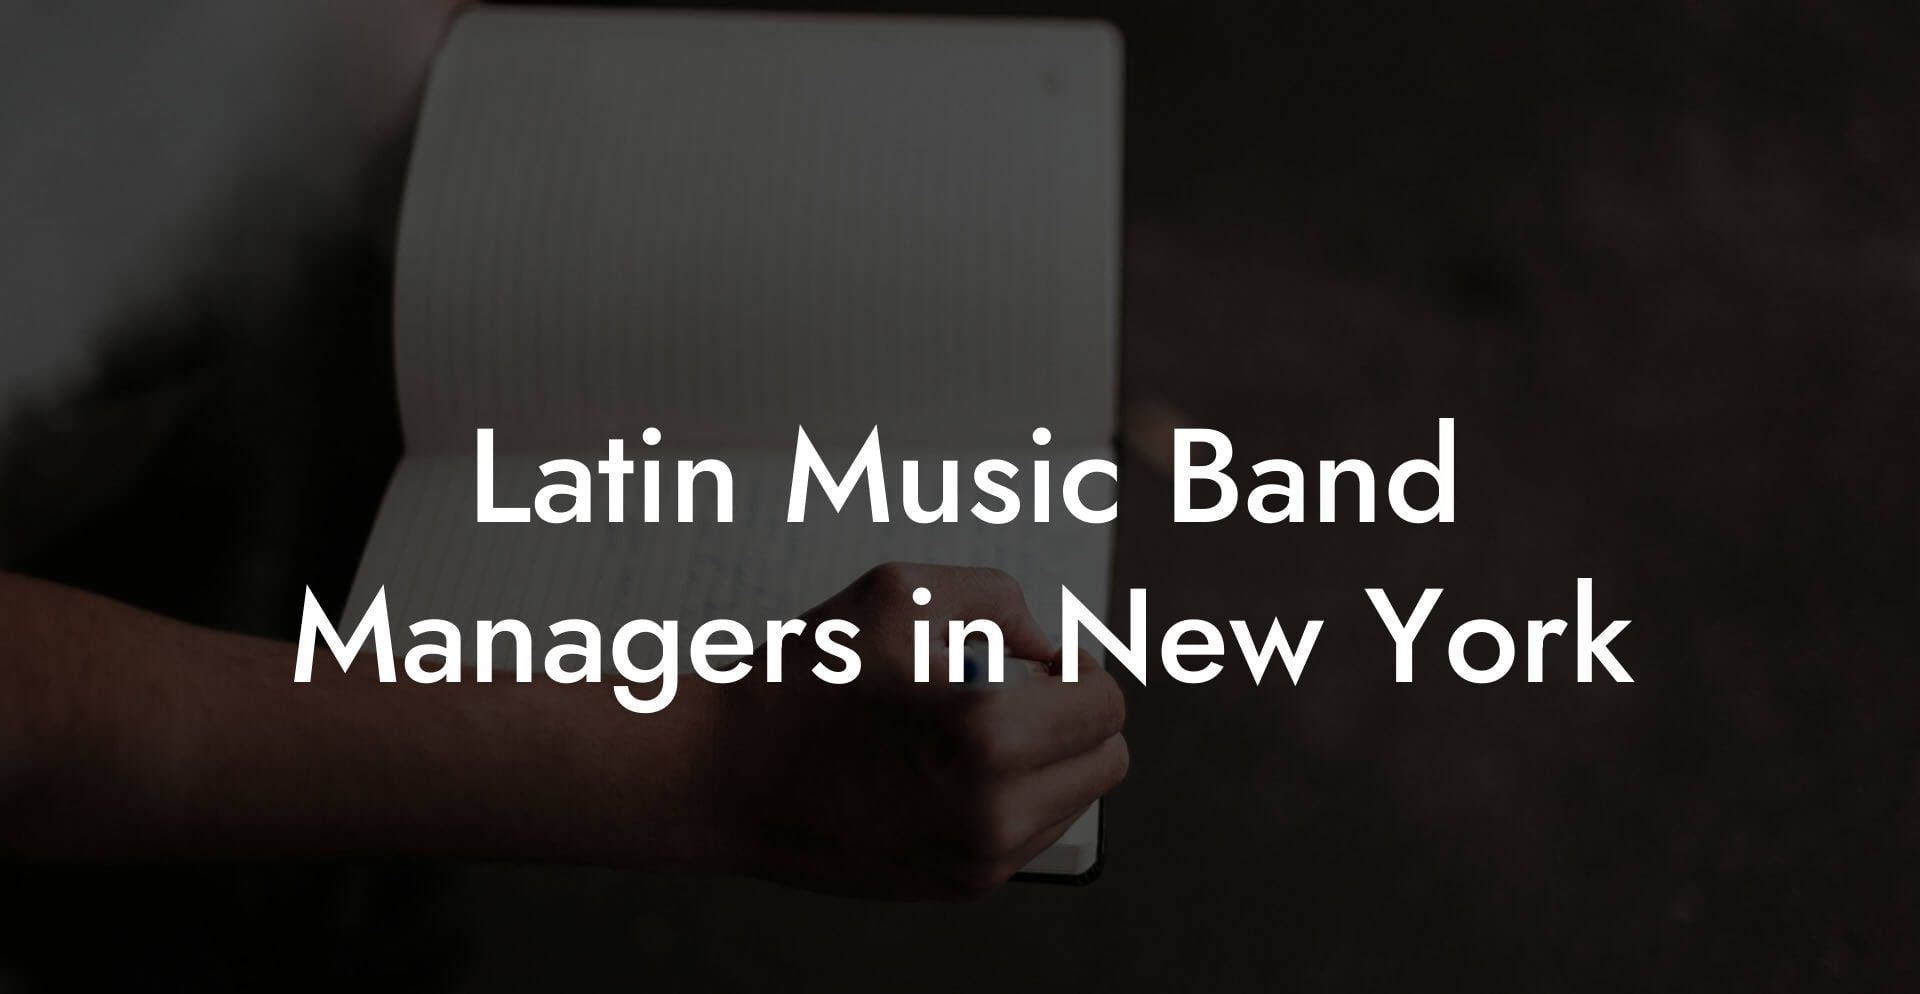 Latin Music Band Managers in New York